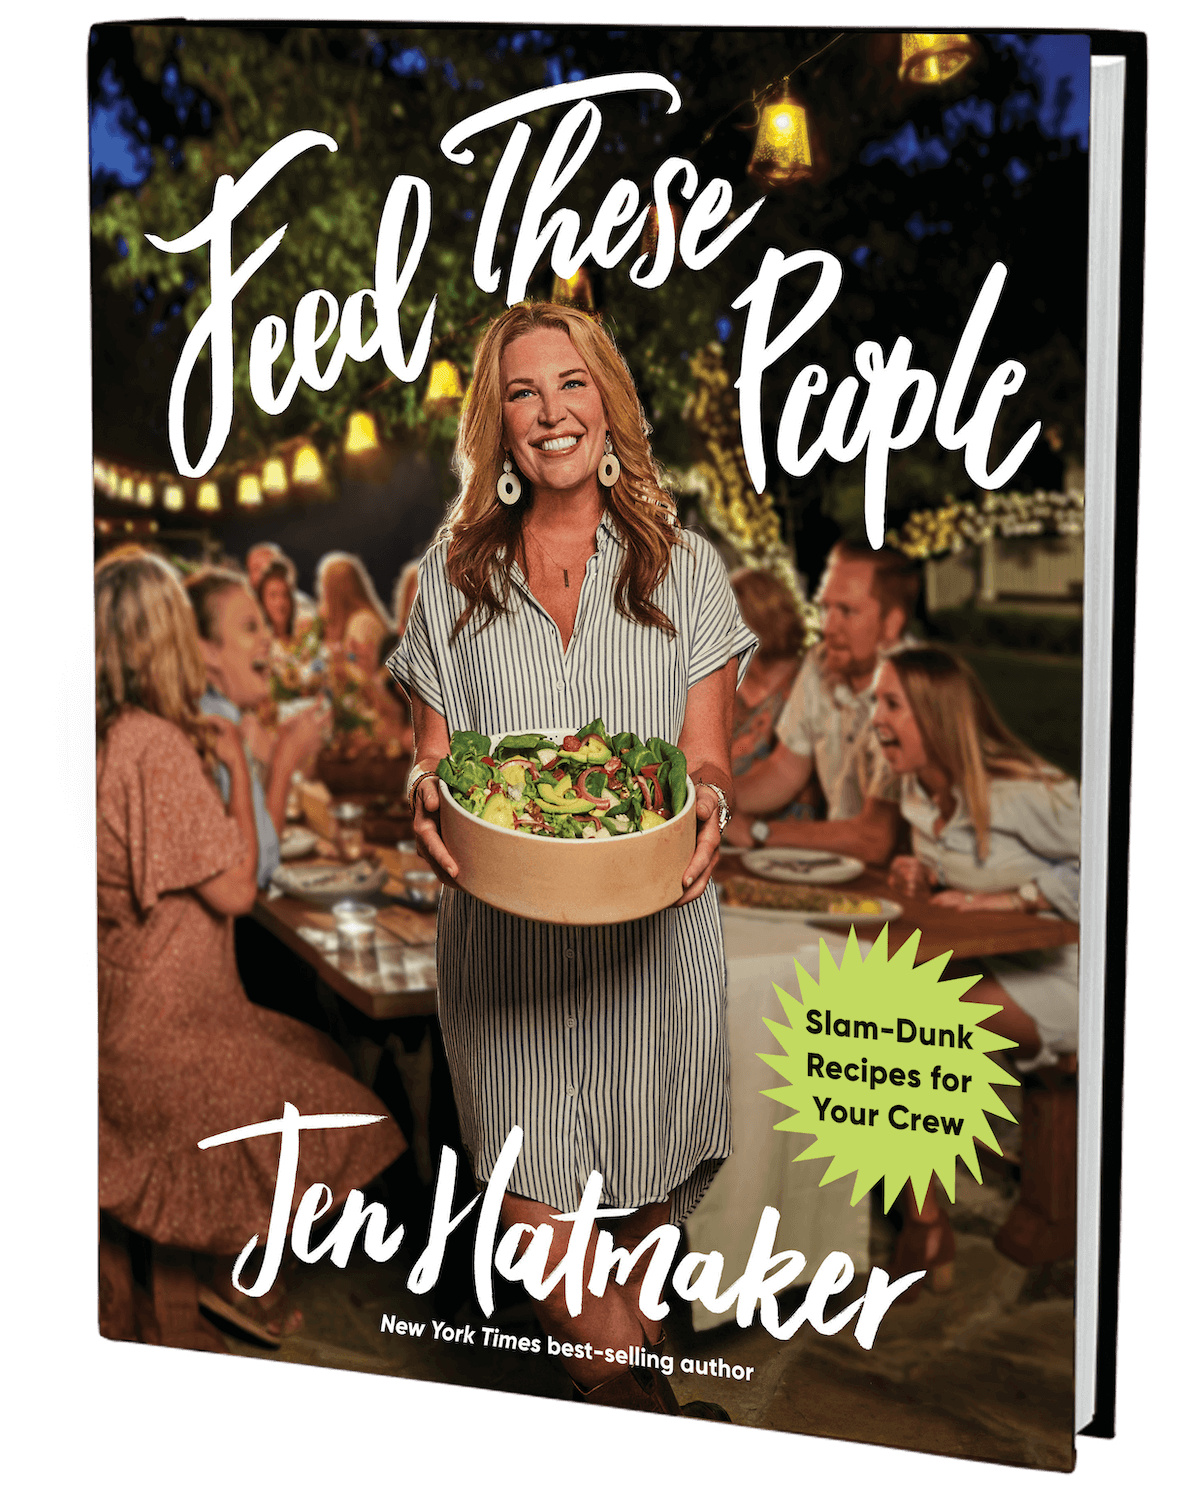 Feed These People: Slam Dunk Recipes for Your Crew by Jen Hatmaker book cover. #feedthesepeople